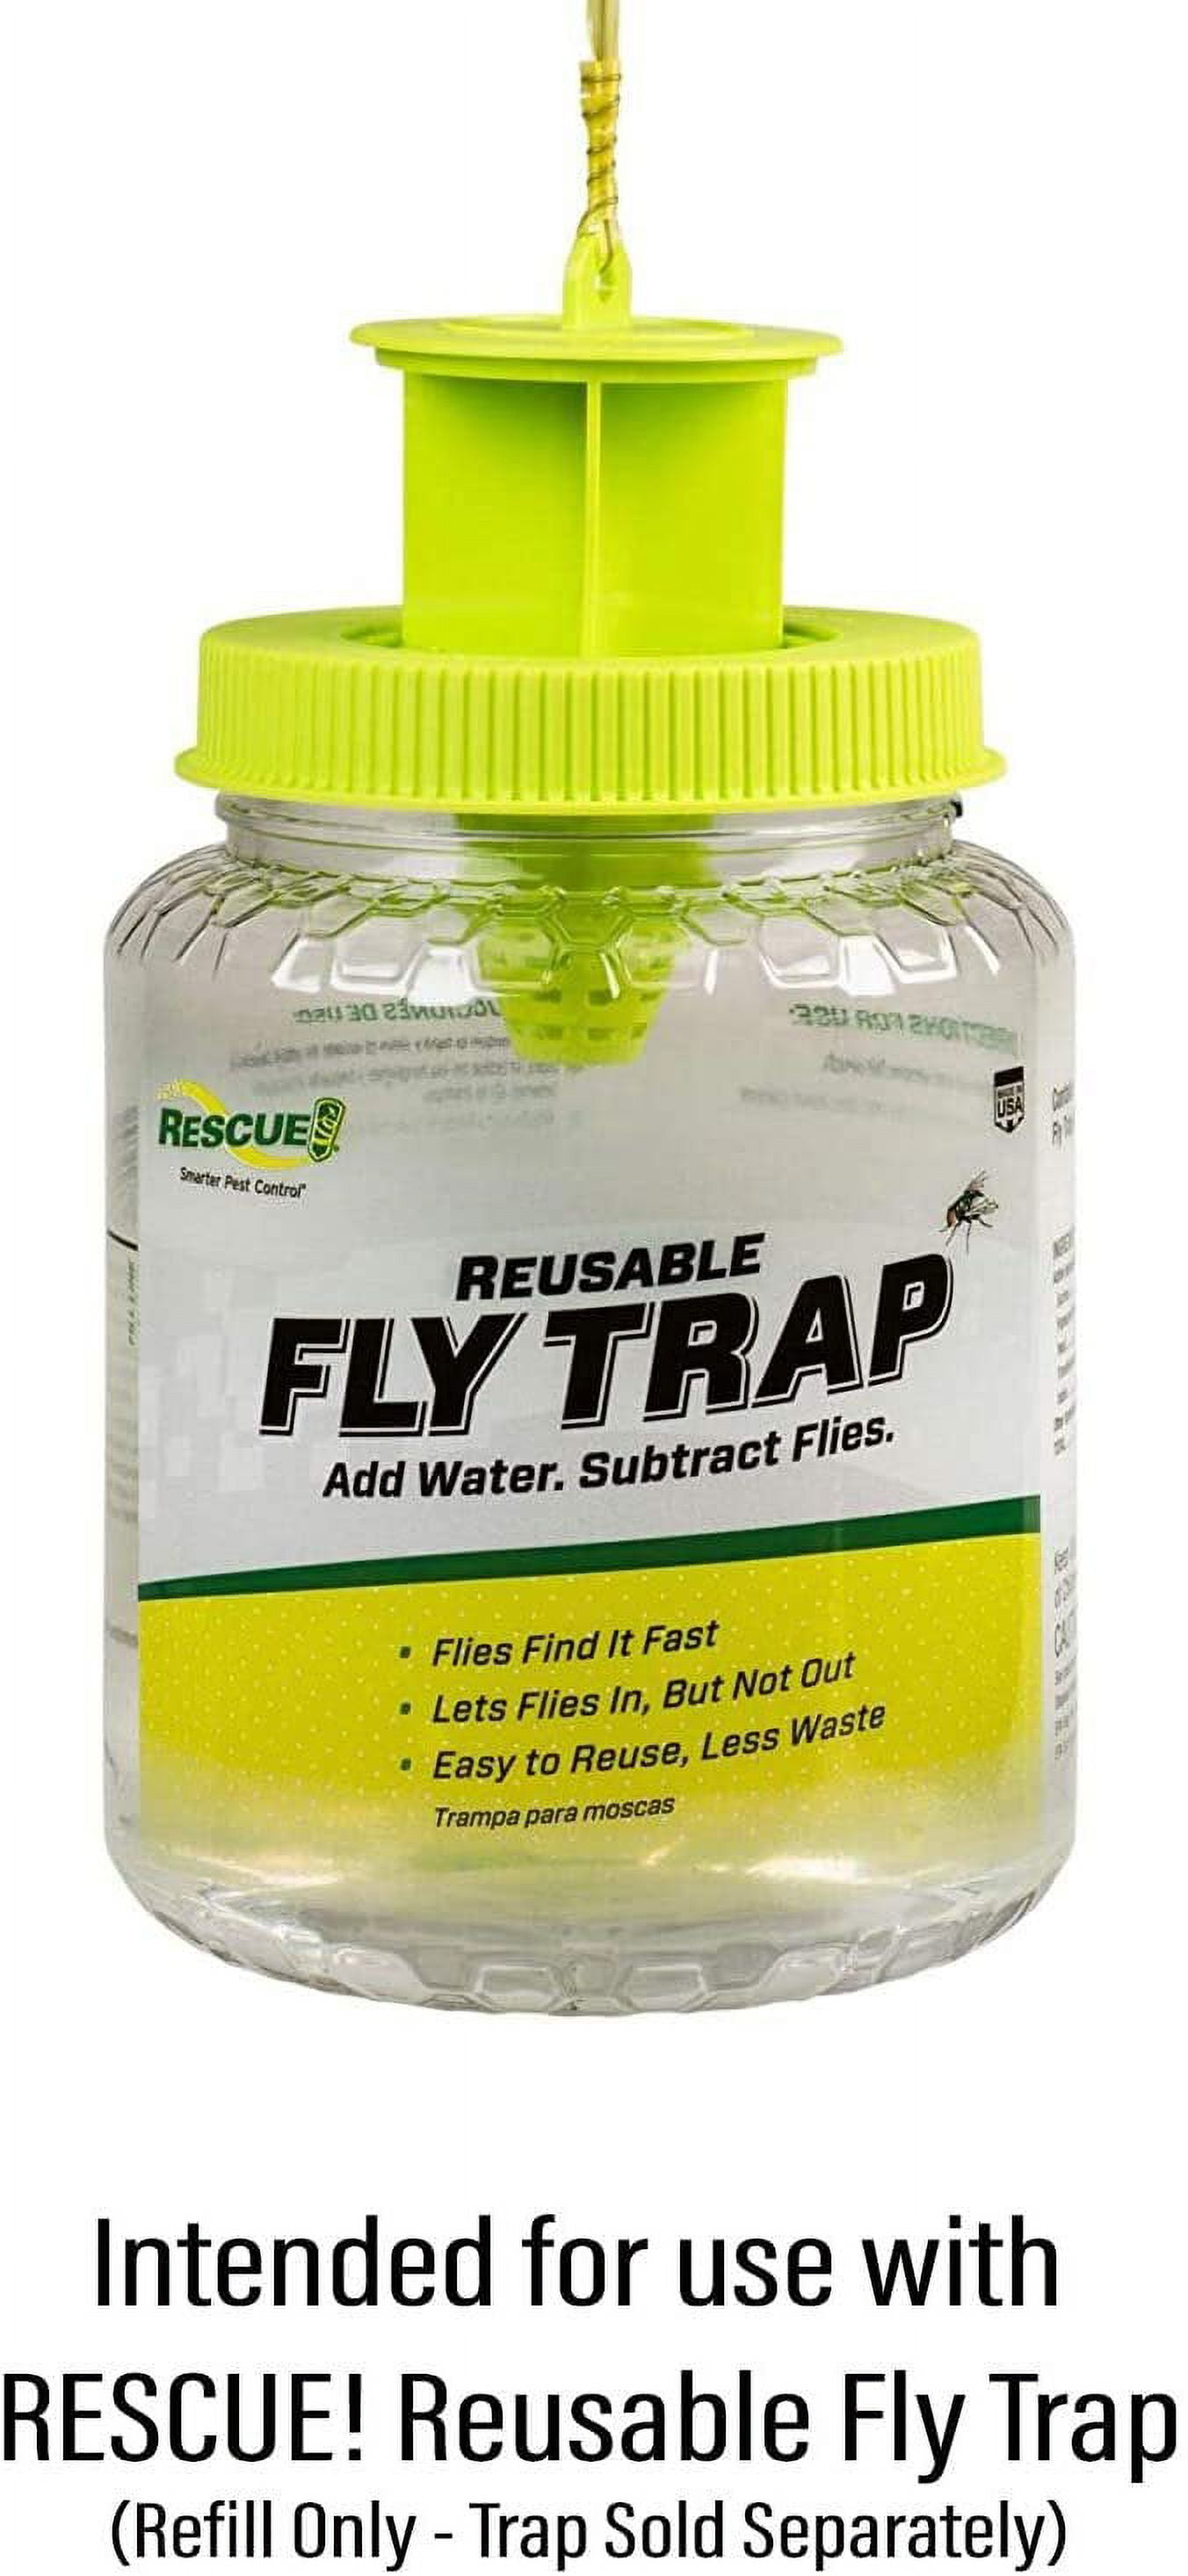  RESCUE! Fruit Fly Trap Bait Refill – 30 Day Supply